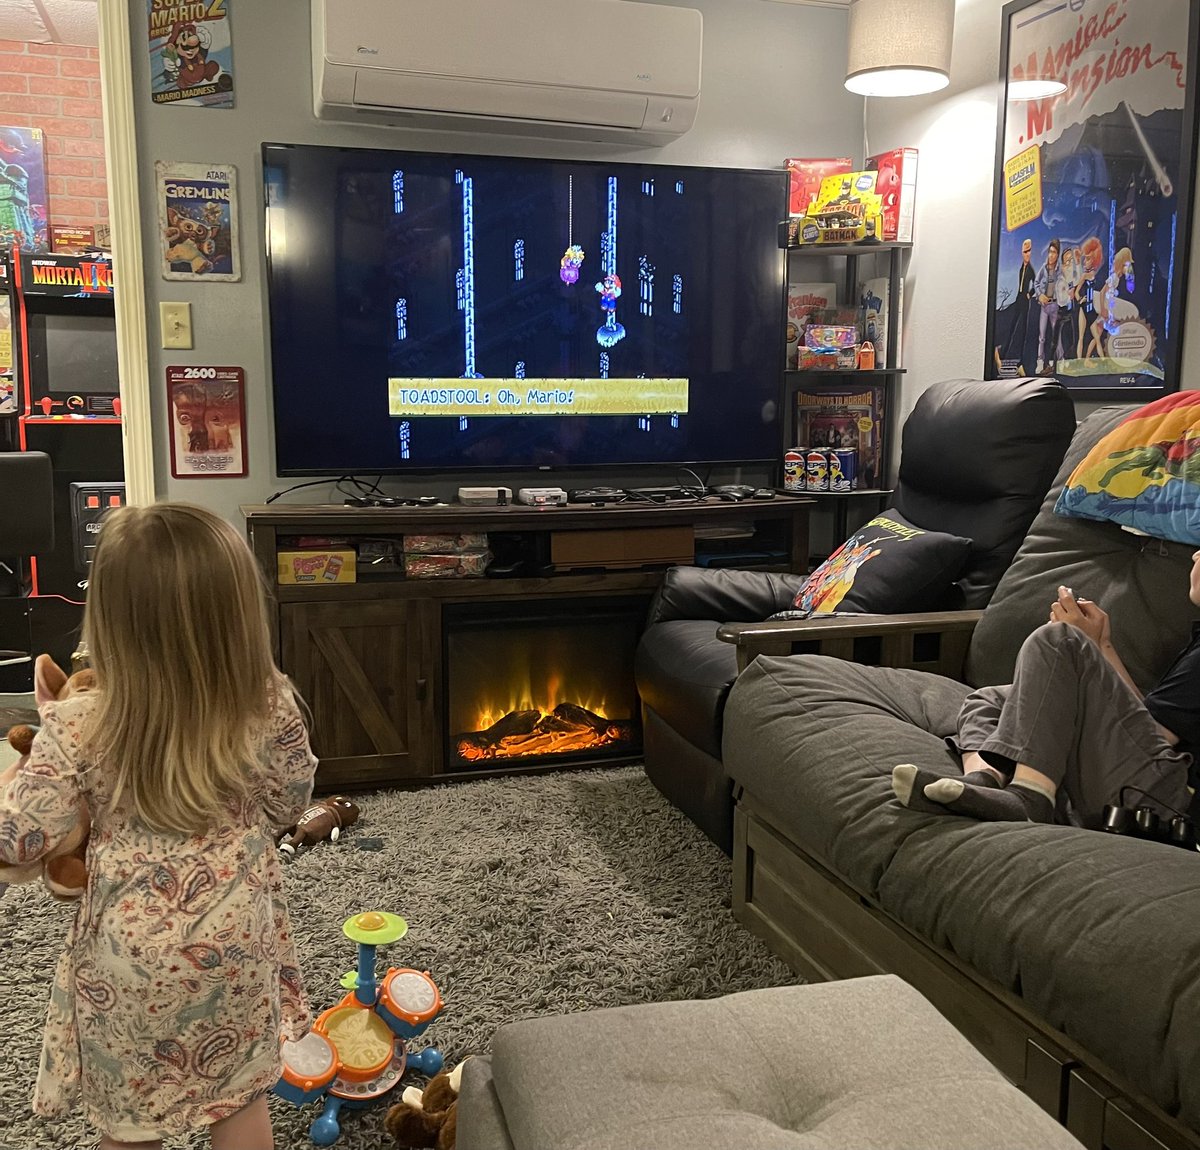 What kind of father would I be if I didn’t raise them with Super Mario RPG?